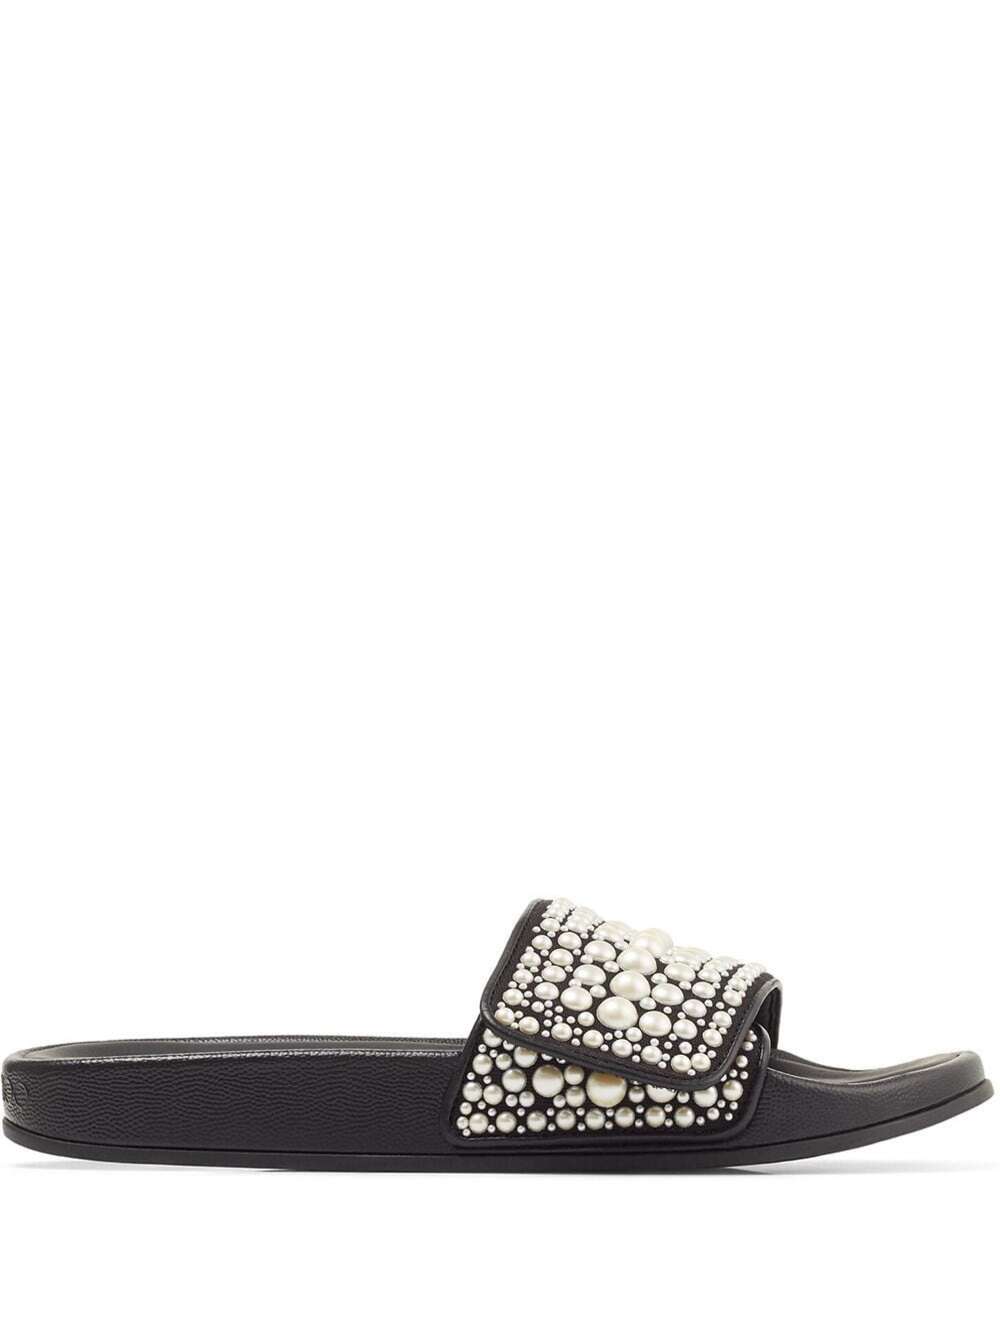 Jimmy Choo Black Plastic Mule Slides With Fitz Decoration With Faux Pearls Detail